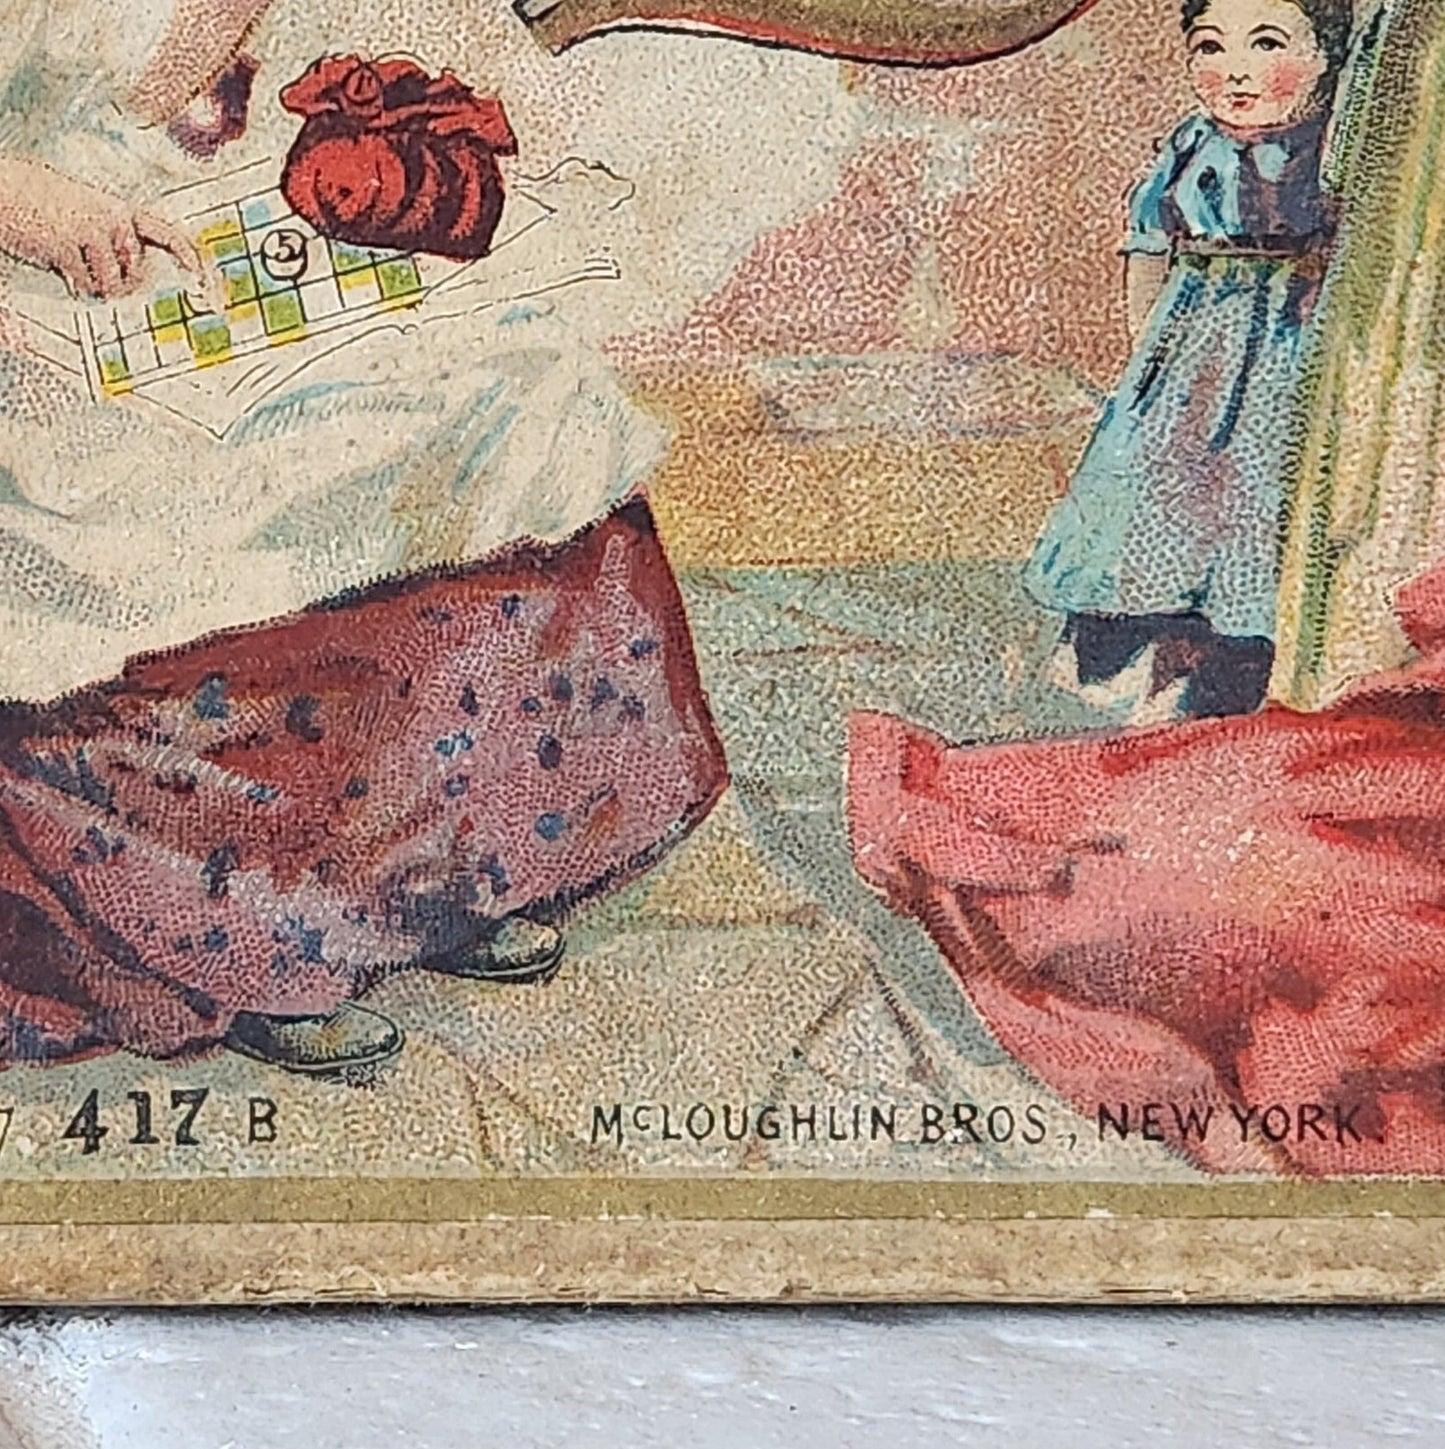 1899 McLoughlin Brothers Lotto Game Number 417B